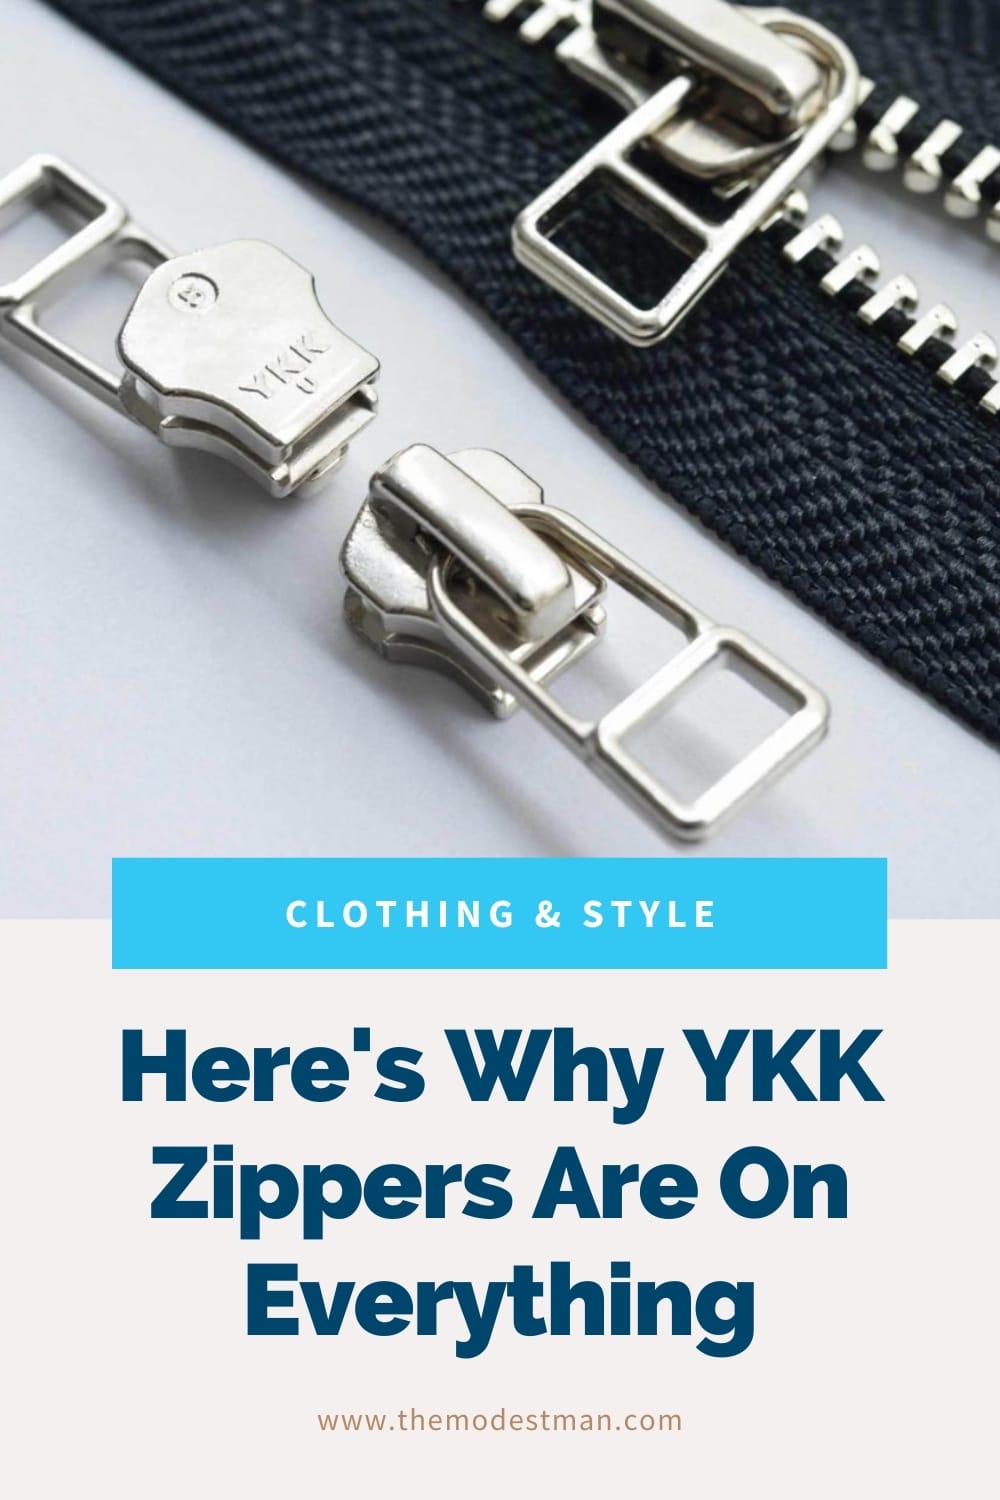 Heres Why YKK Zippers Are On Everything hero